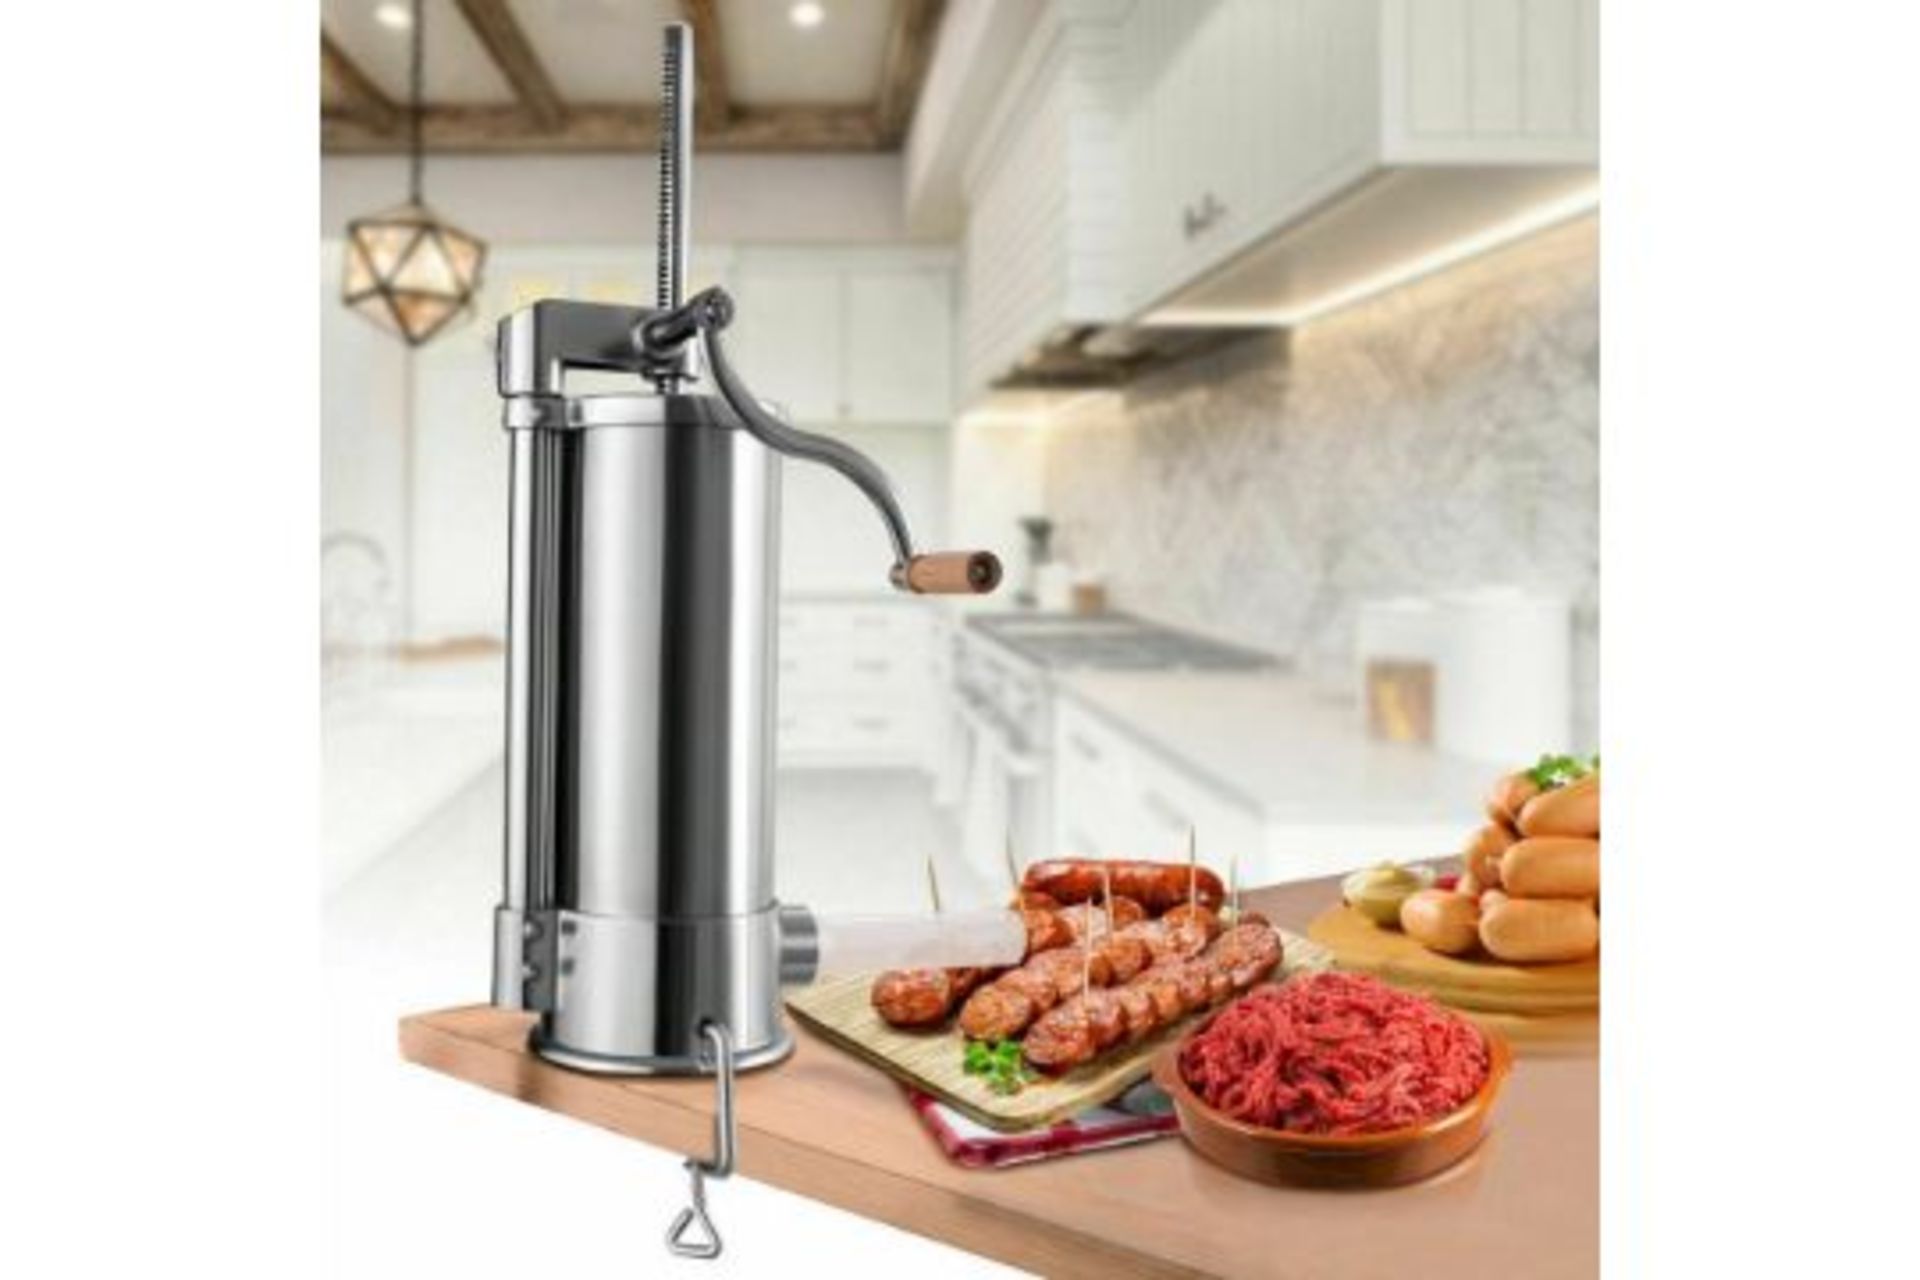 6 L 10 Lbs Sausage Stuffer Maker. - R14.2. This is 6 L stainless steel sausage stuffer maker,